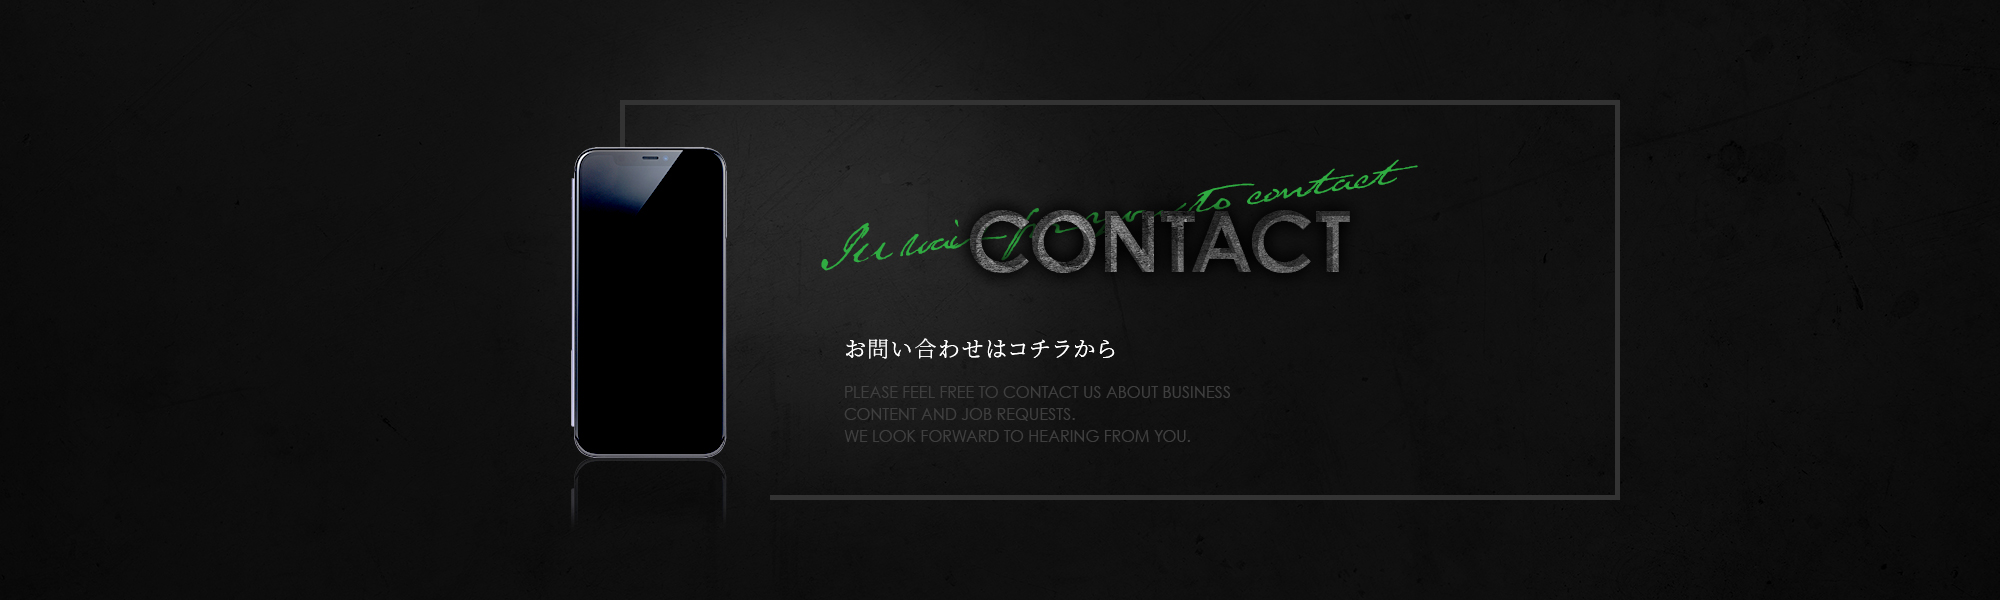 banner_contacts_bg